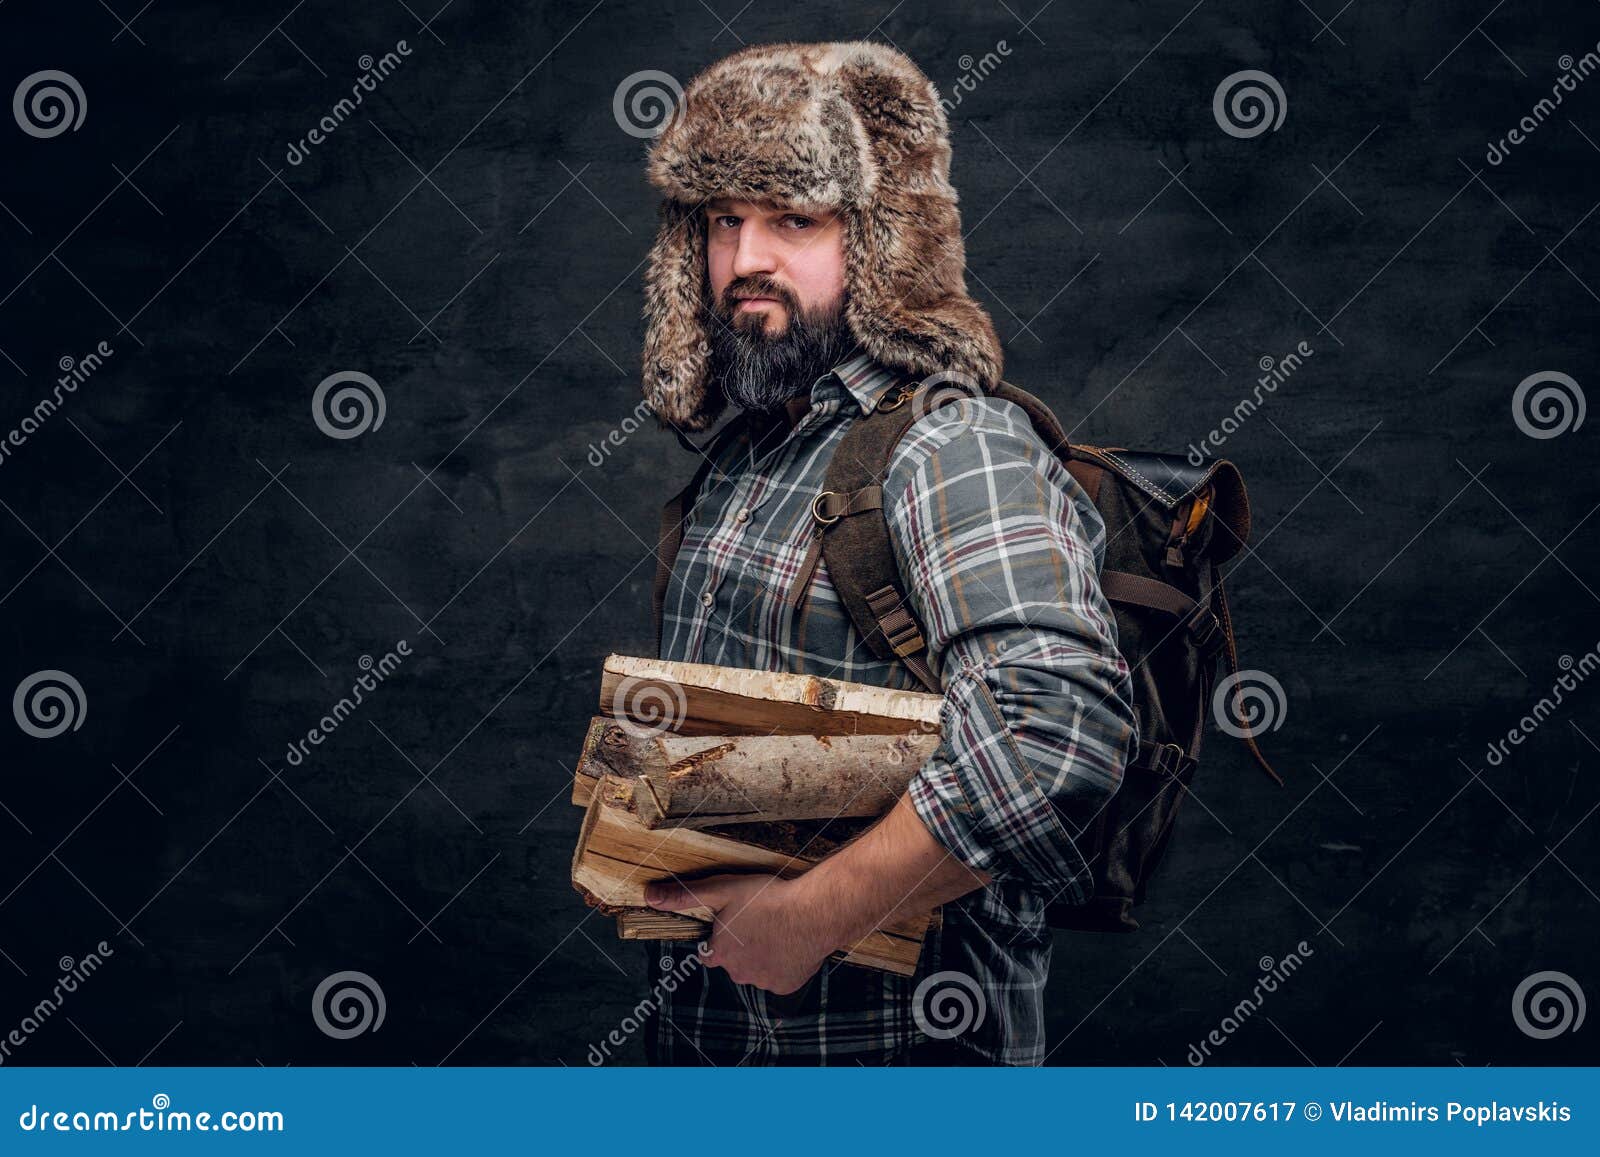 portrait of a bearded woodcutter with a backpack dressed in a plaid shirt and trapper hat holding firewood.